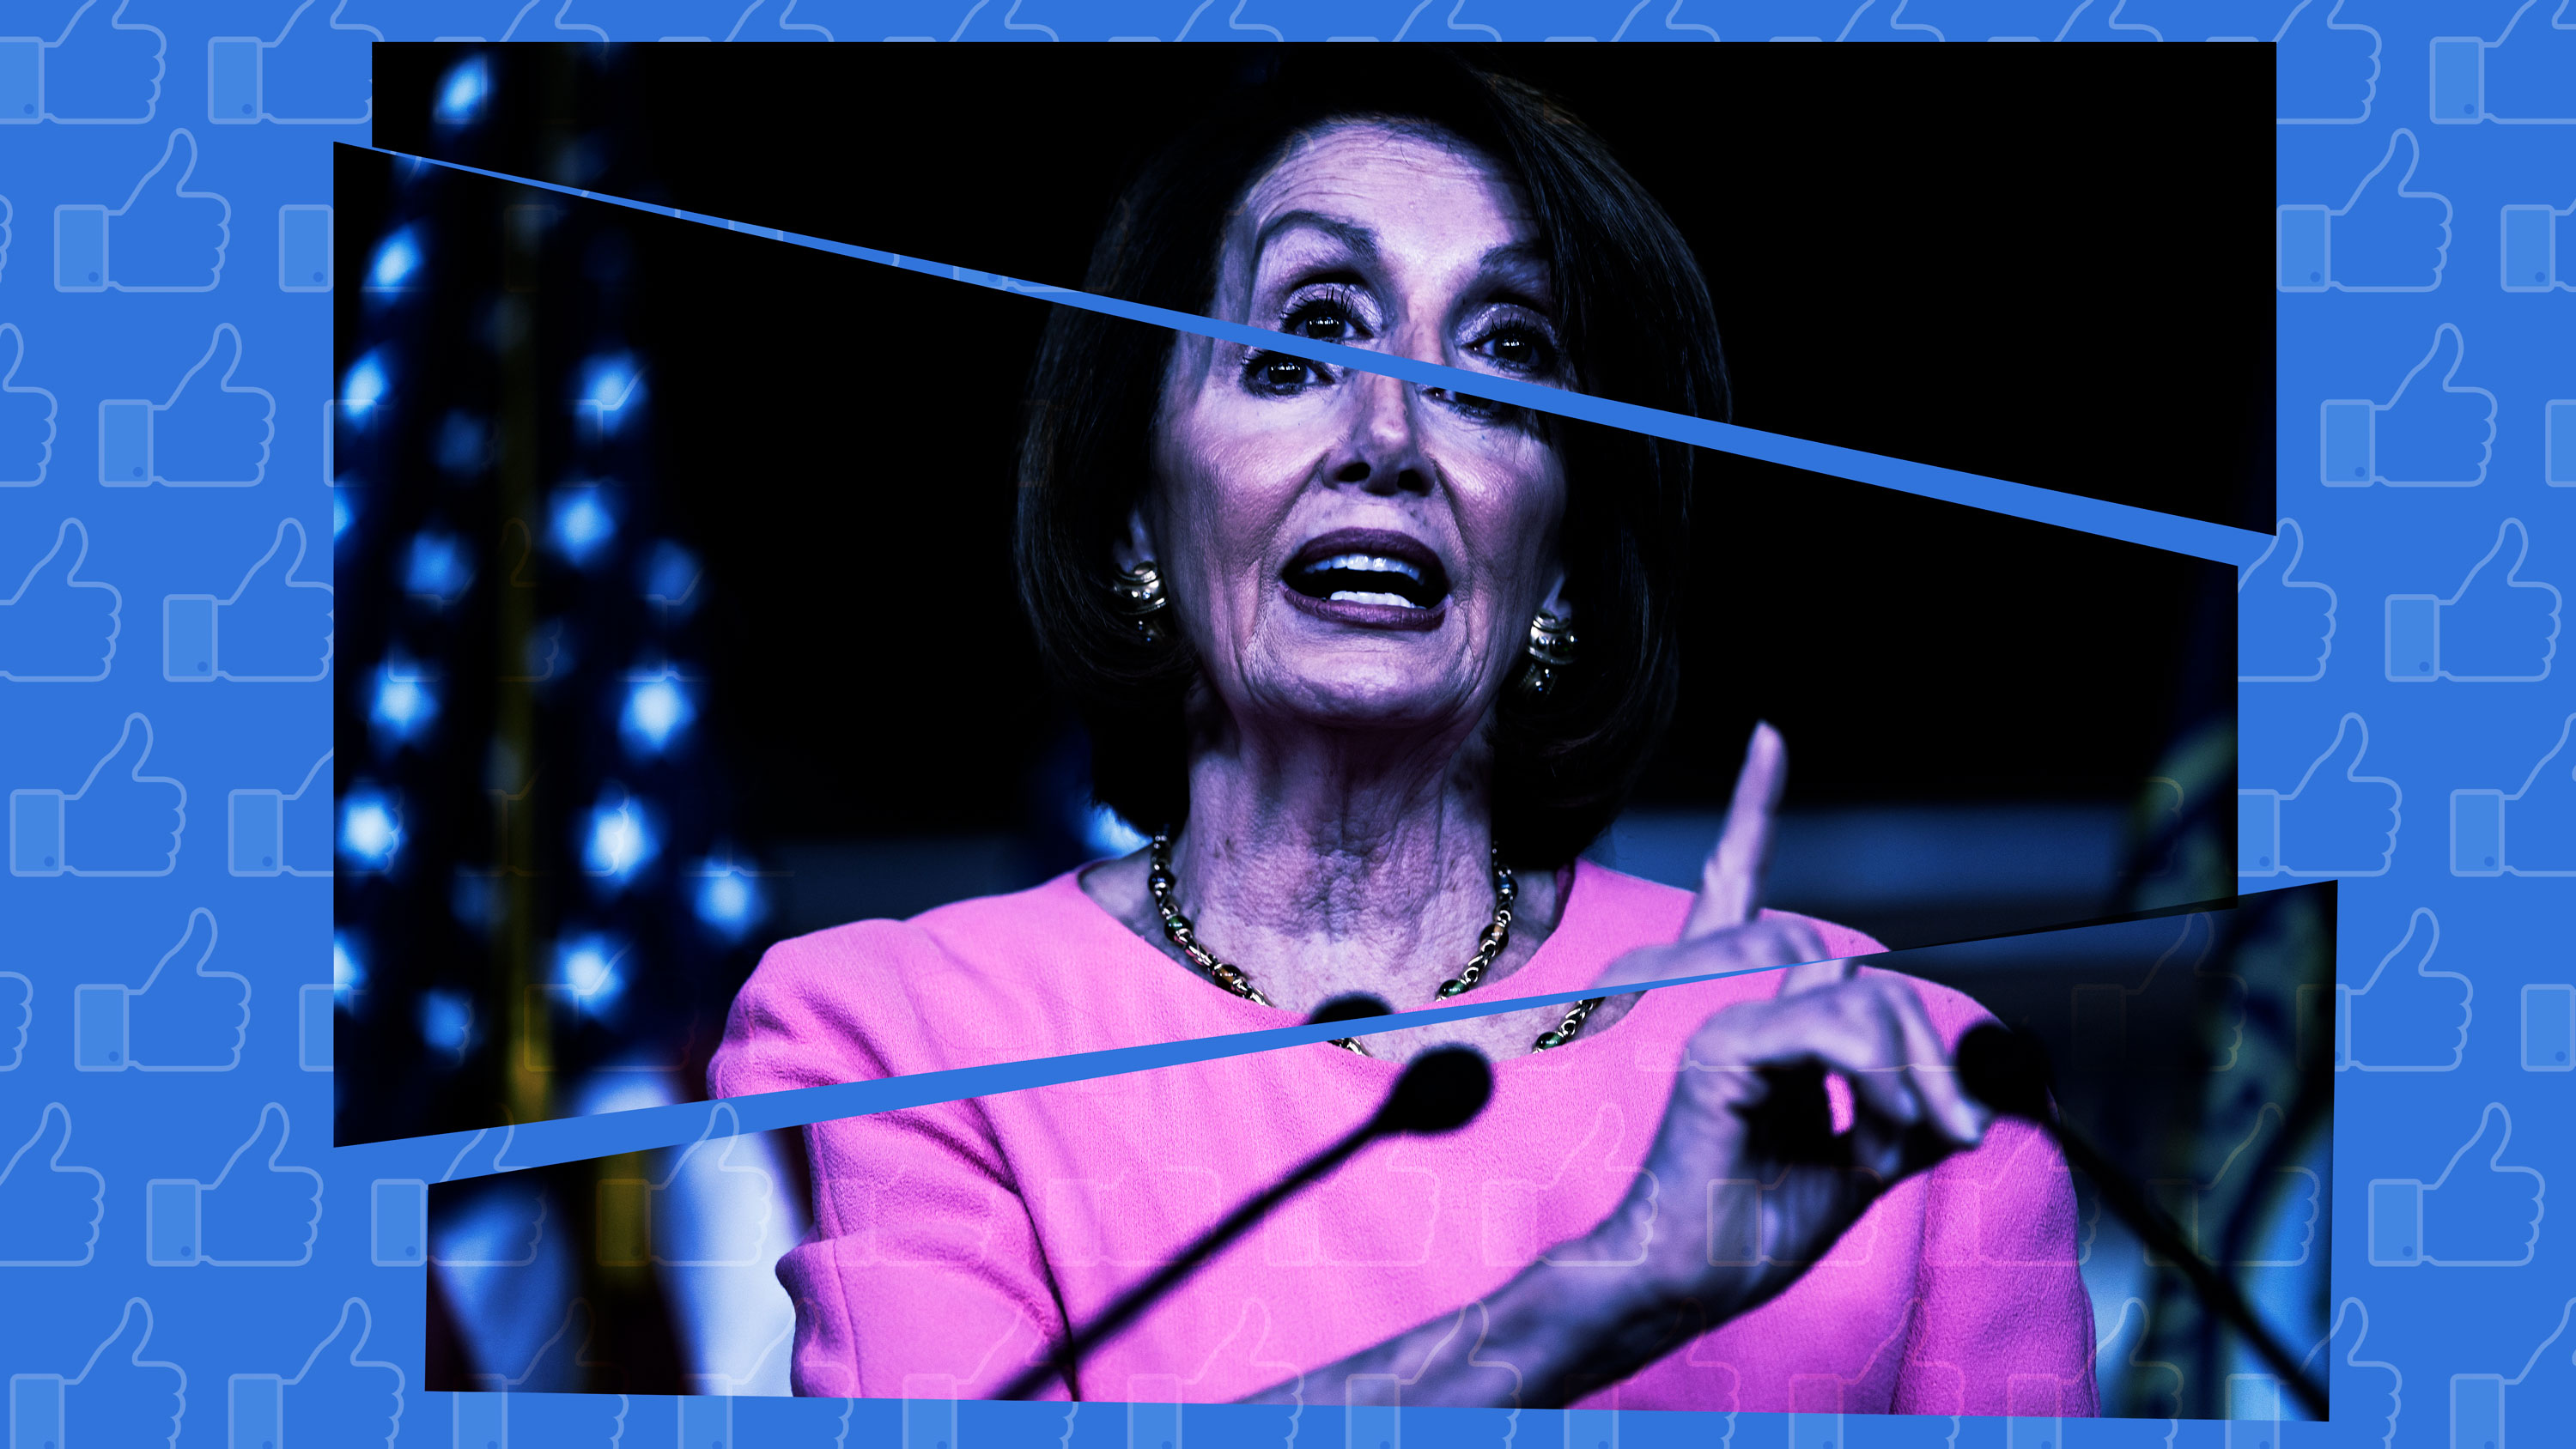 A photo illustration showing a photo of Nancy Pelosi and Facebook thumbs ups